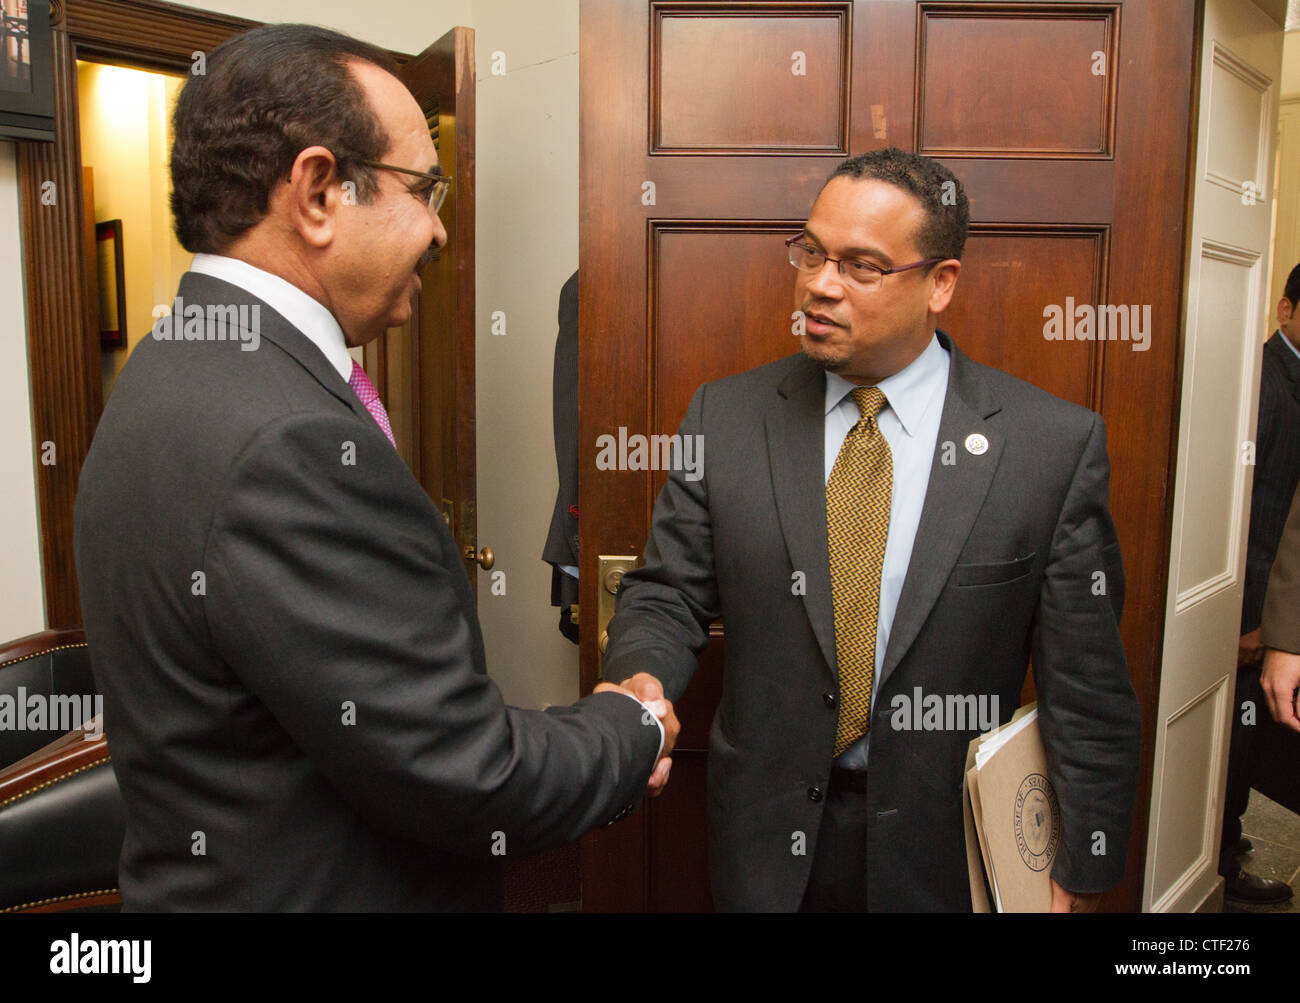 H.E. Lt. General Shaikh Rashed Bin Abdulla Al Khalifa, Minister of Interior meets with Rep. Keith Ellison (D-MN) during an offic Stock Photo